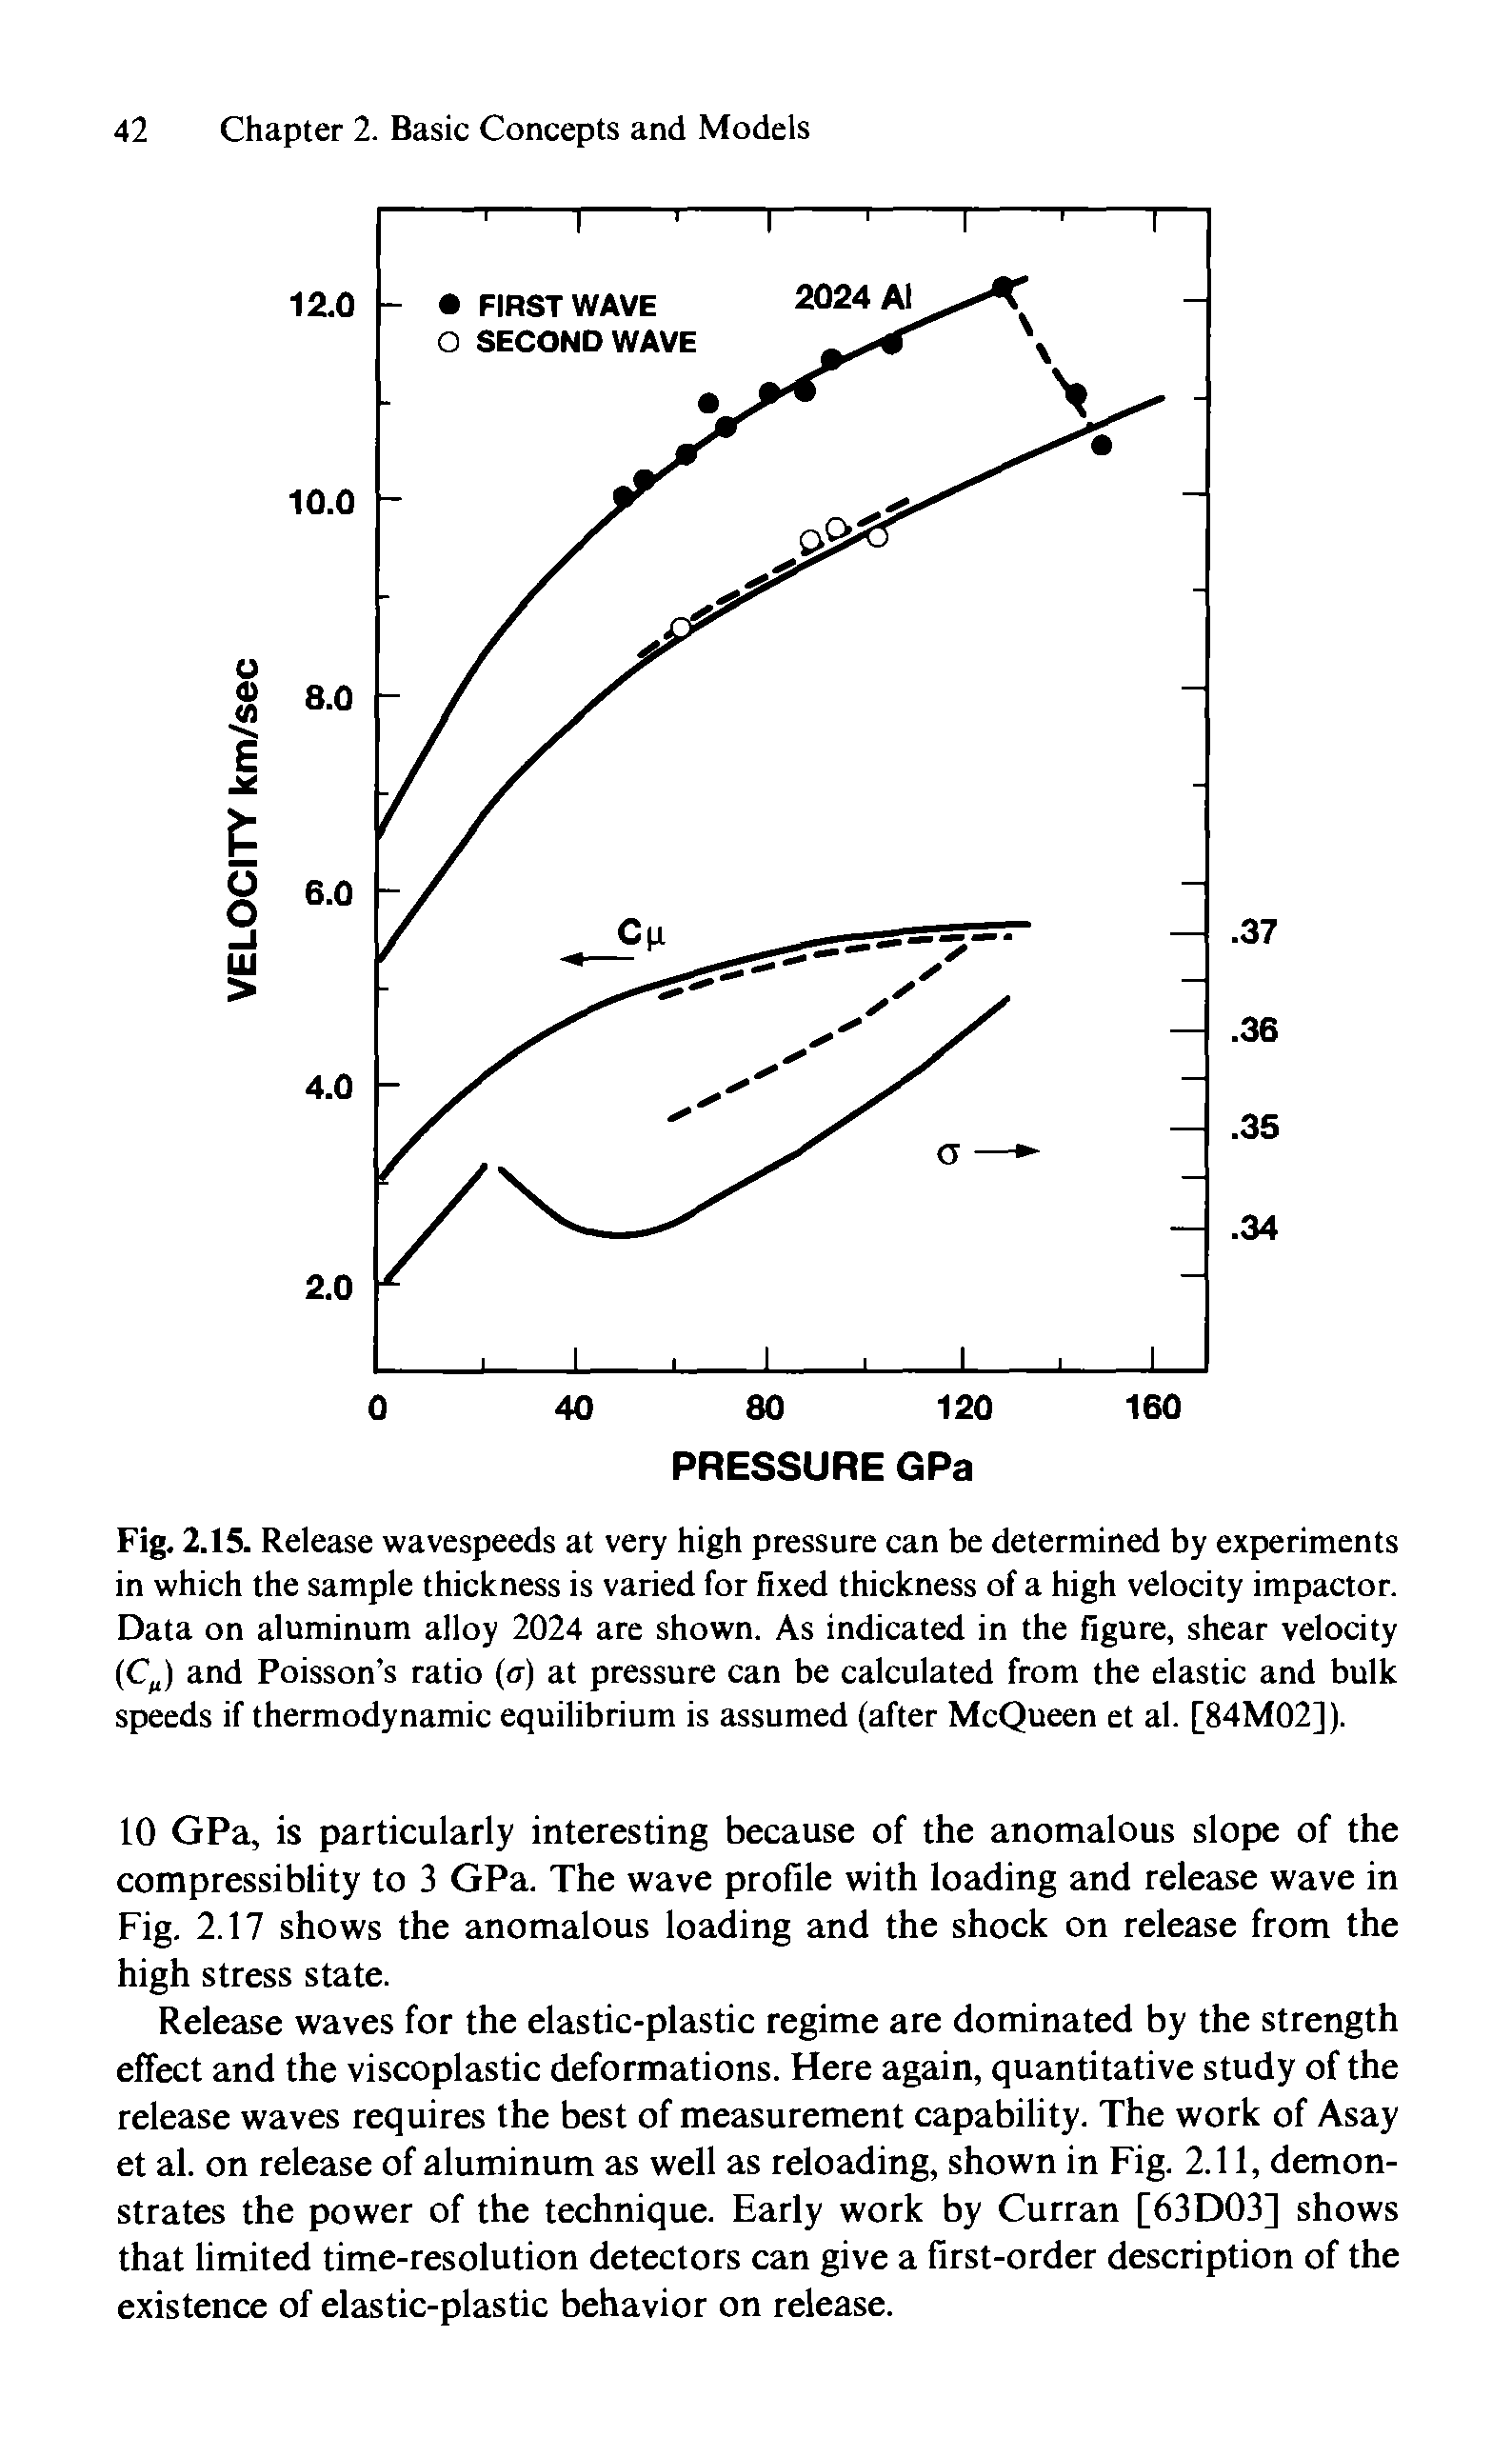 Fig. 2.15. Release wavespeeds at very high pressure can be determined by experiments in which the sample thickness is varied for fixed thickness of a high velocity impactor. Data on aluminum alloy 2024 are shown. As indicated in the figure, shear velocity (C ) and Poisson s ratio (cr) at pressure can be calculated from the elastic and bulk speeds if thermodynamic equilibrium is assumed (after McQueen et al. [84M02]).